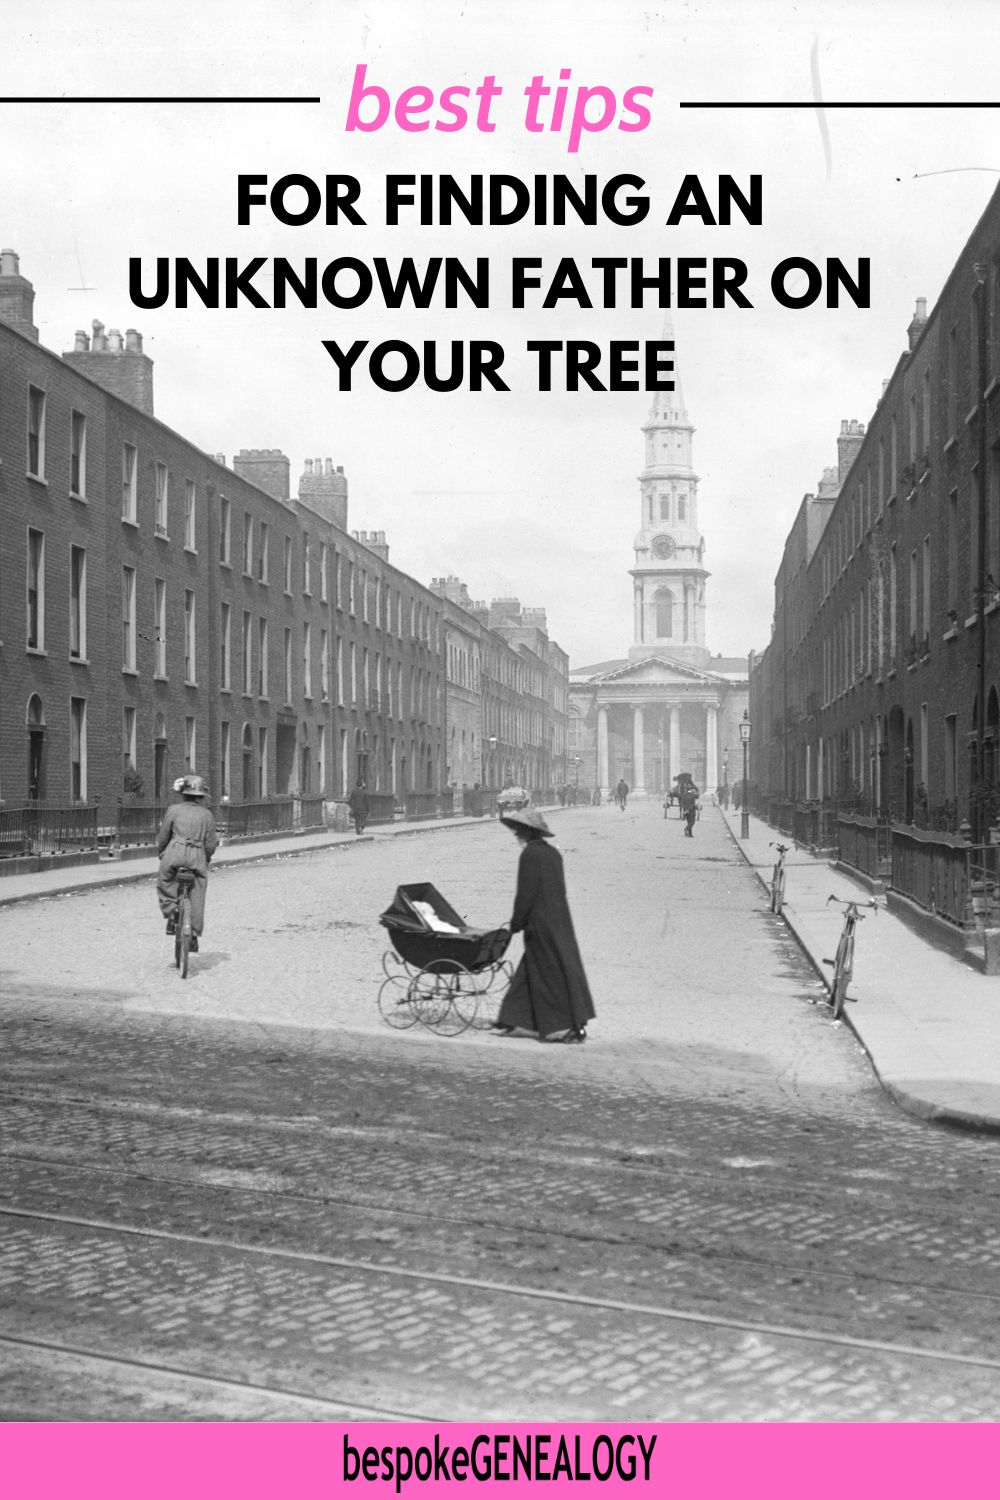 Pinterest pin showing an old photo of a woman pushing a pram with the title best tips for finding an unknown father on your tree.